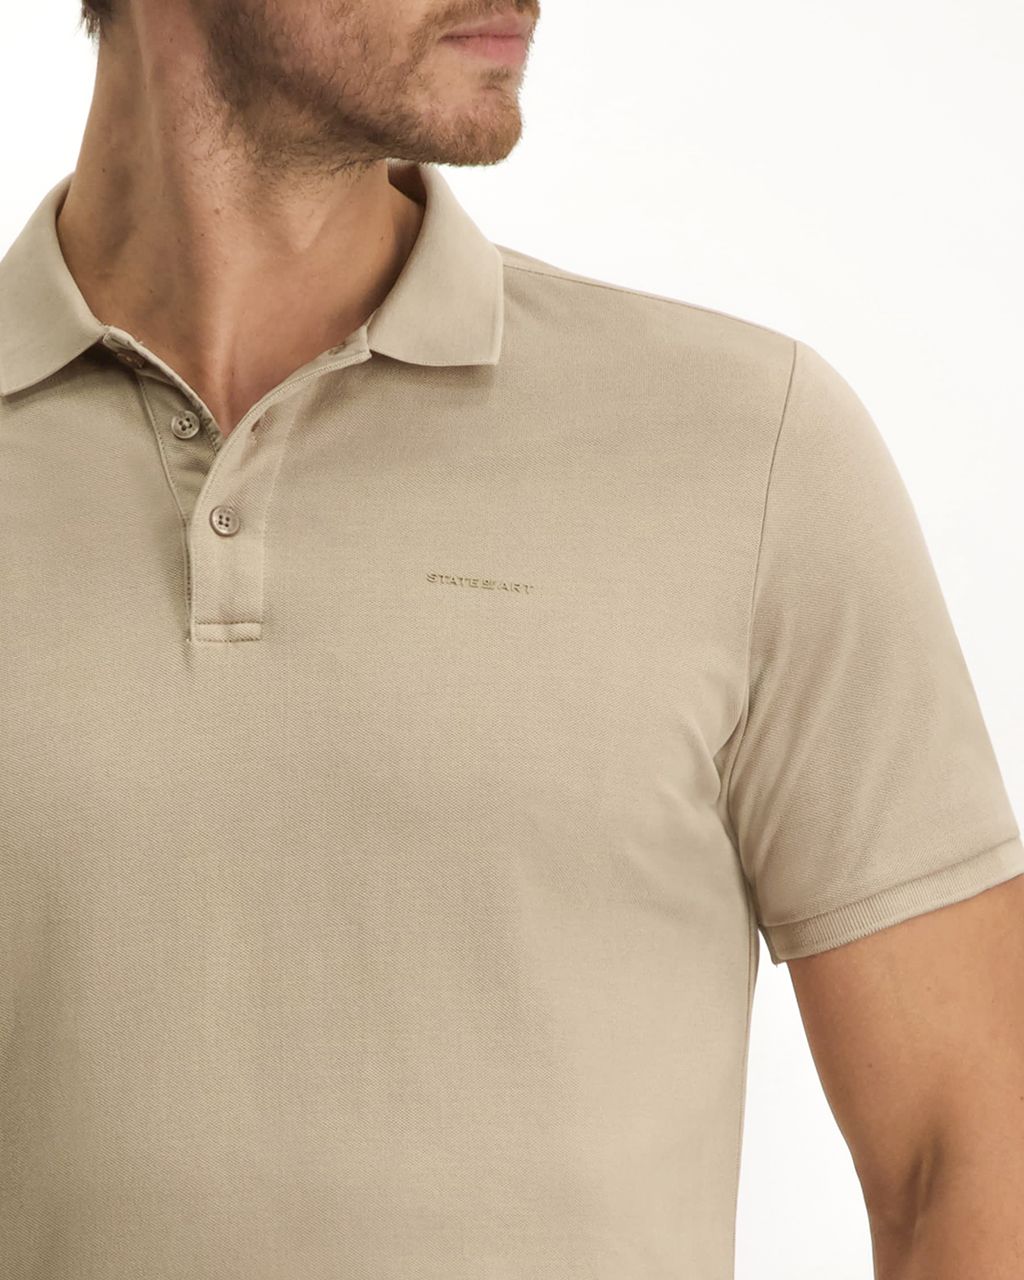 State of Art Polo KM Beige 075930-001-XL